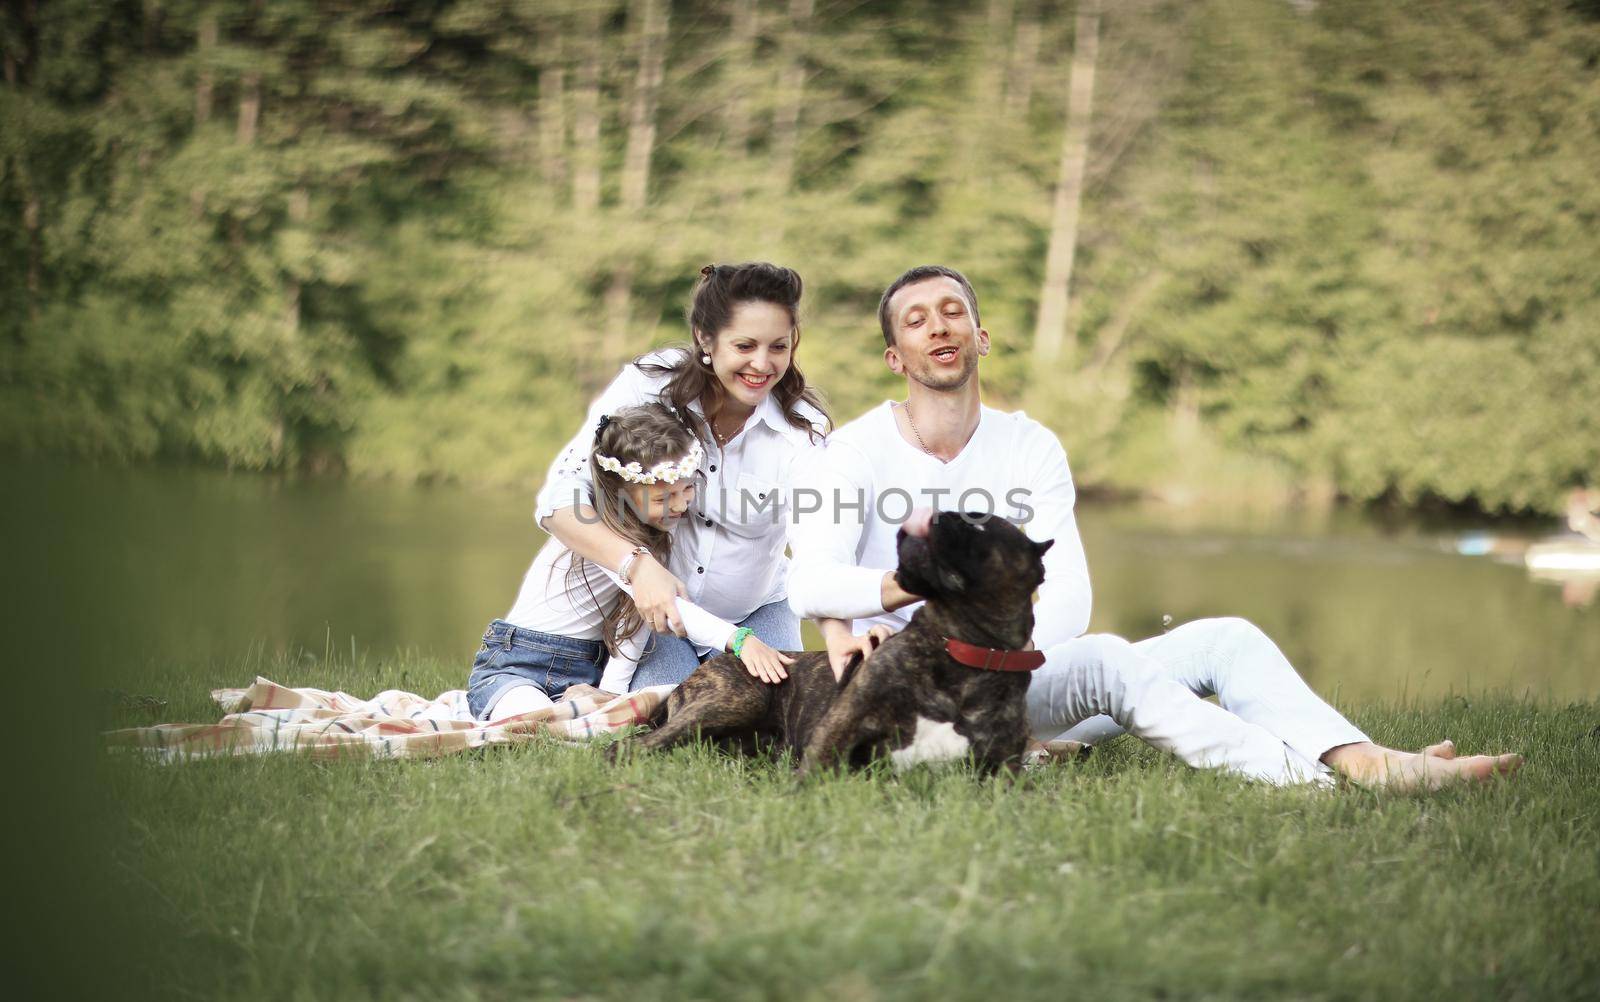 ,little daughter and their dog on a picnic by the river.the photo has a space for your text